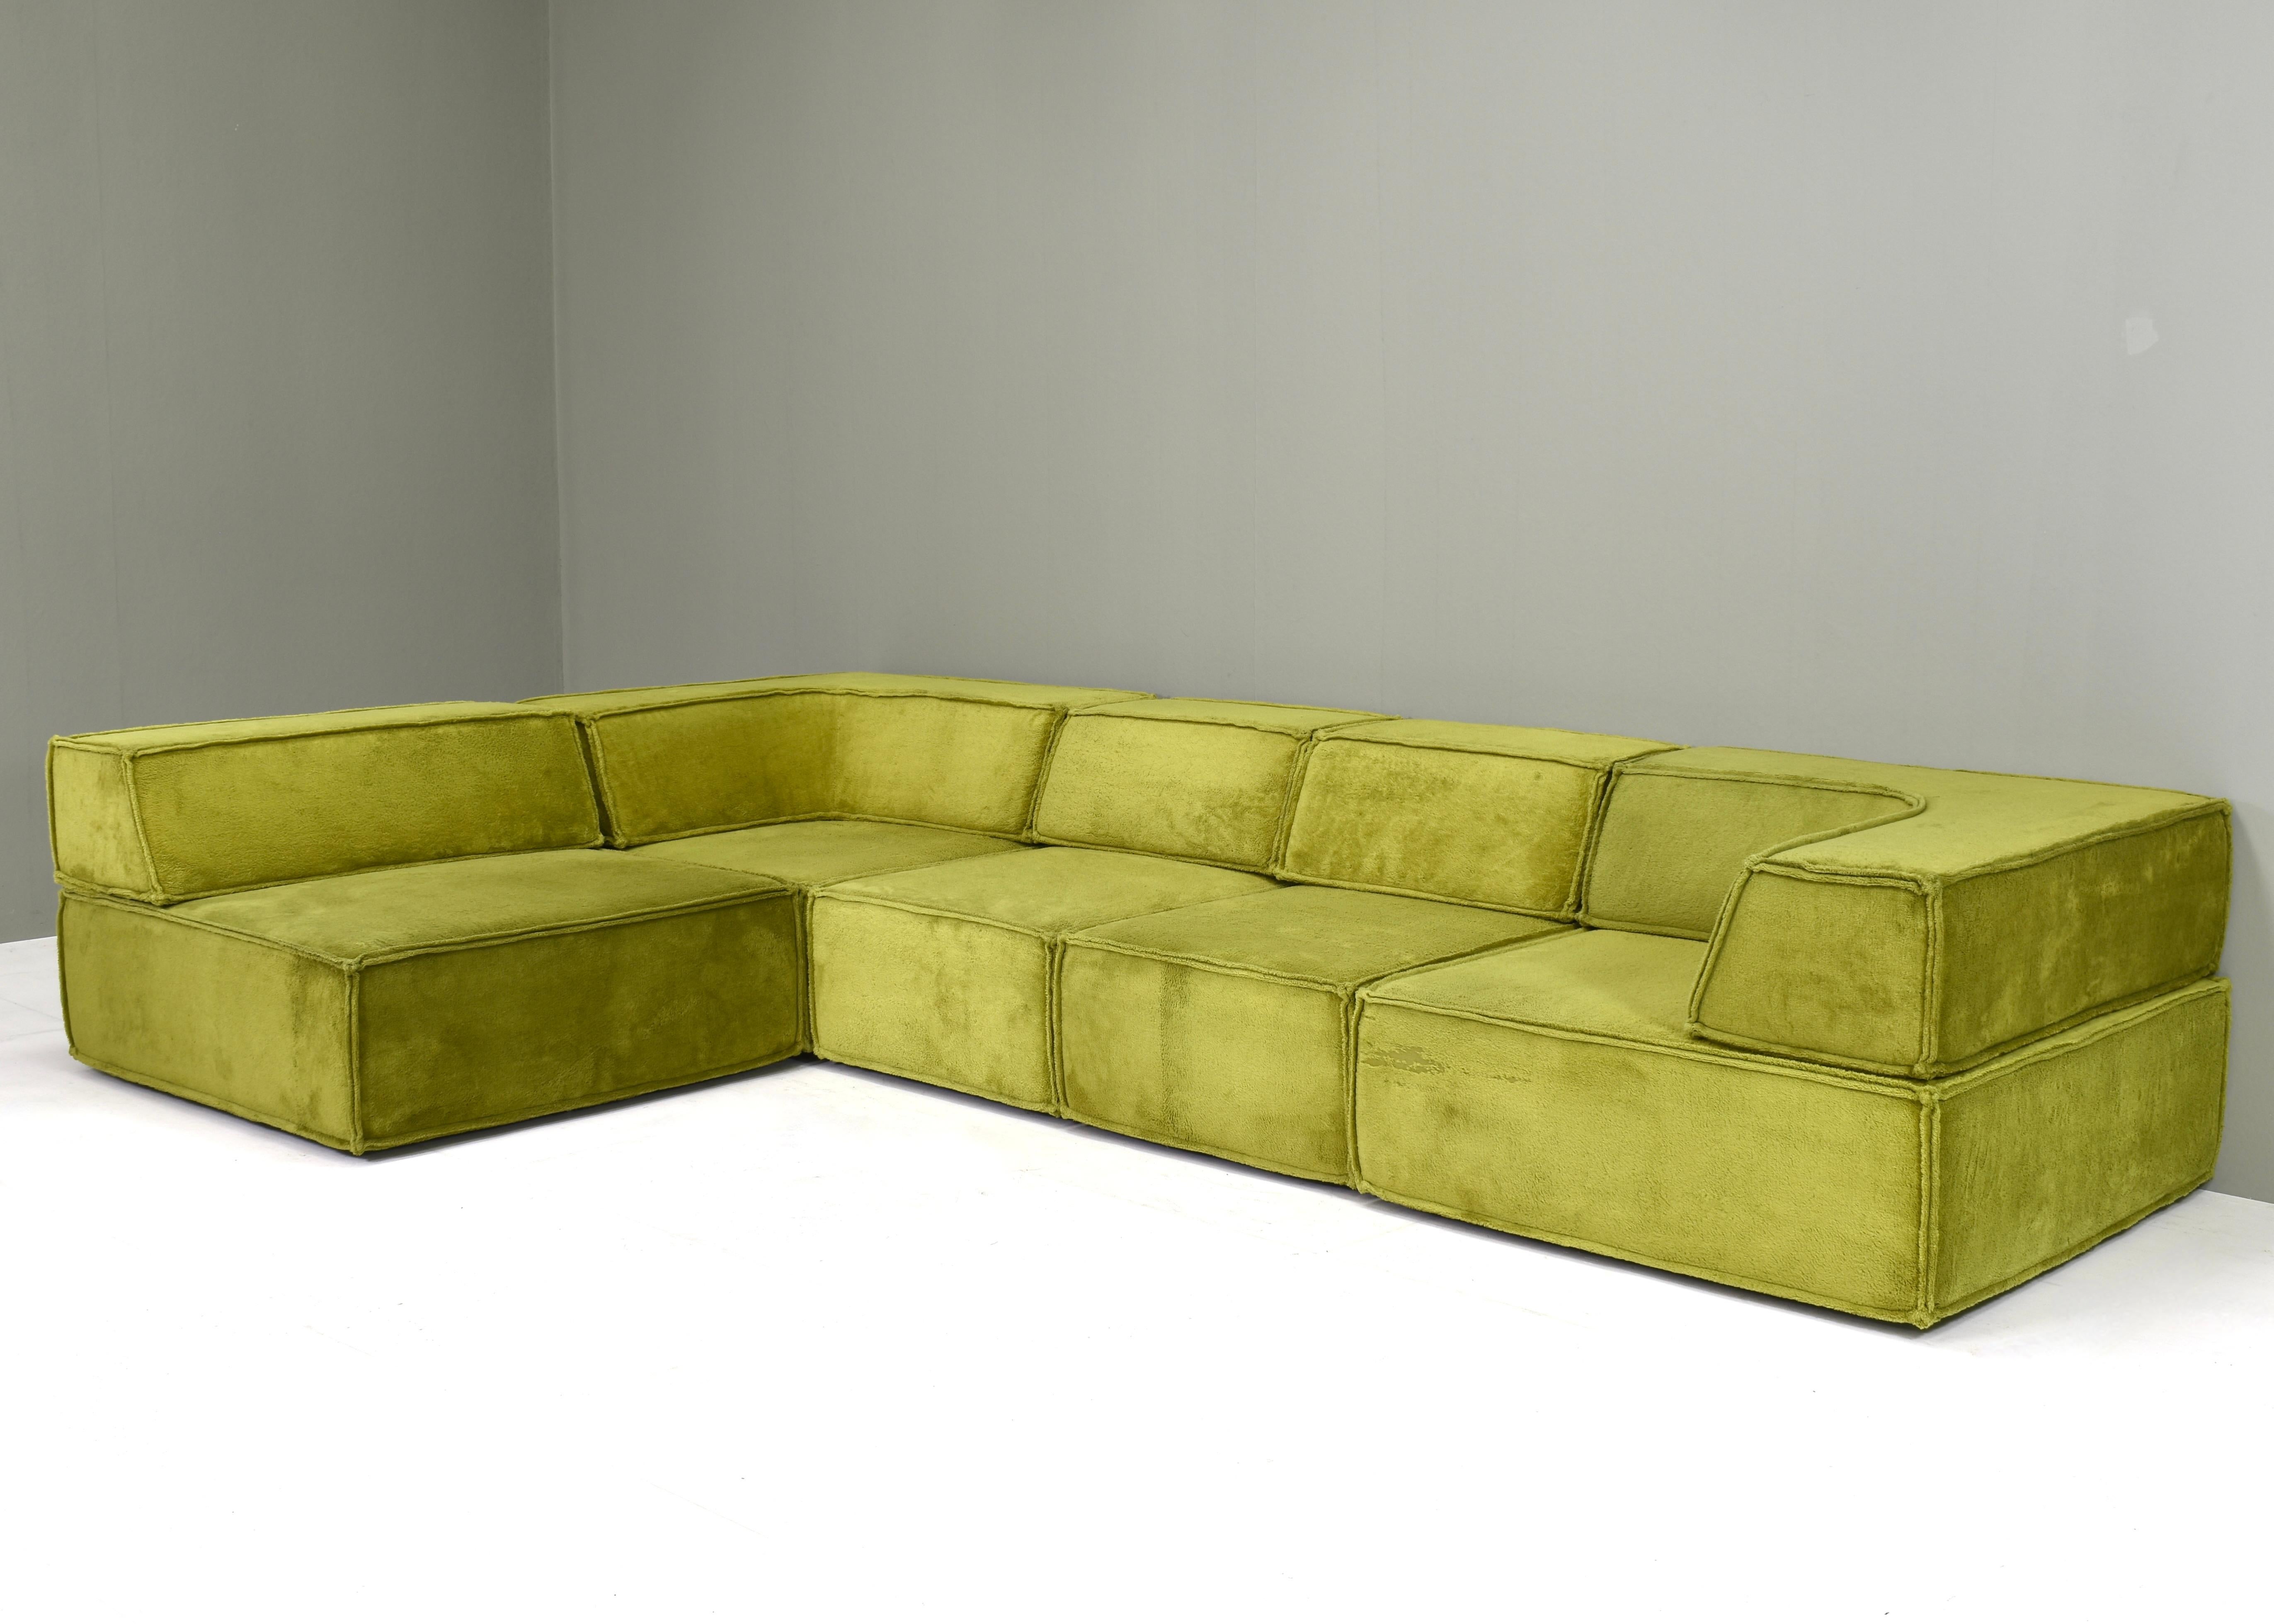 Late 20th Century COR Trio Sectional Sofa by Team Form Ag for COR, Germany / Switzerland, 1972